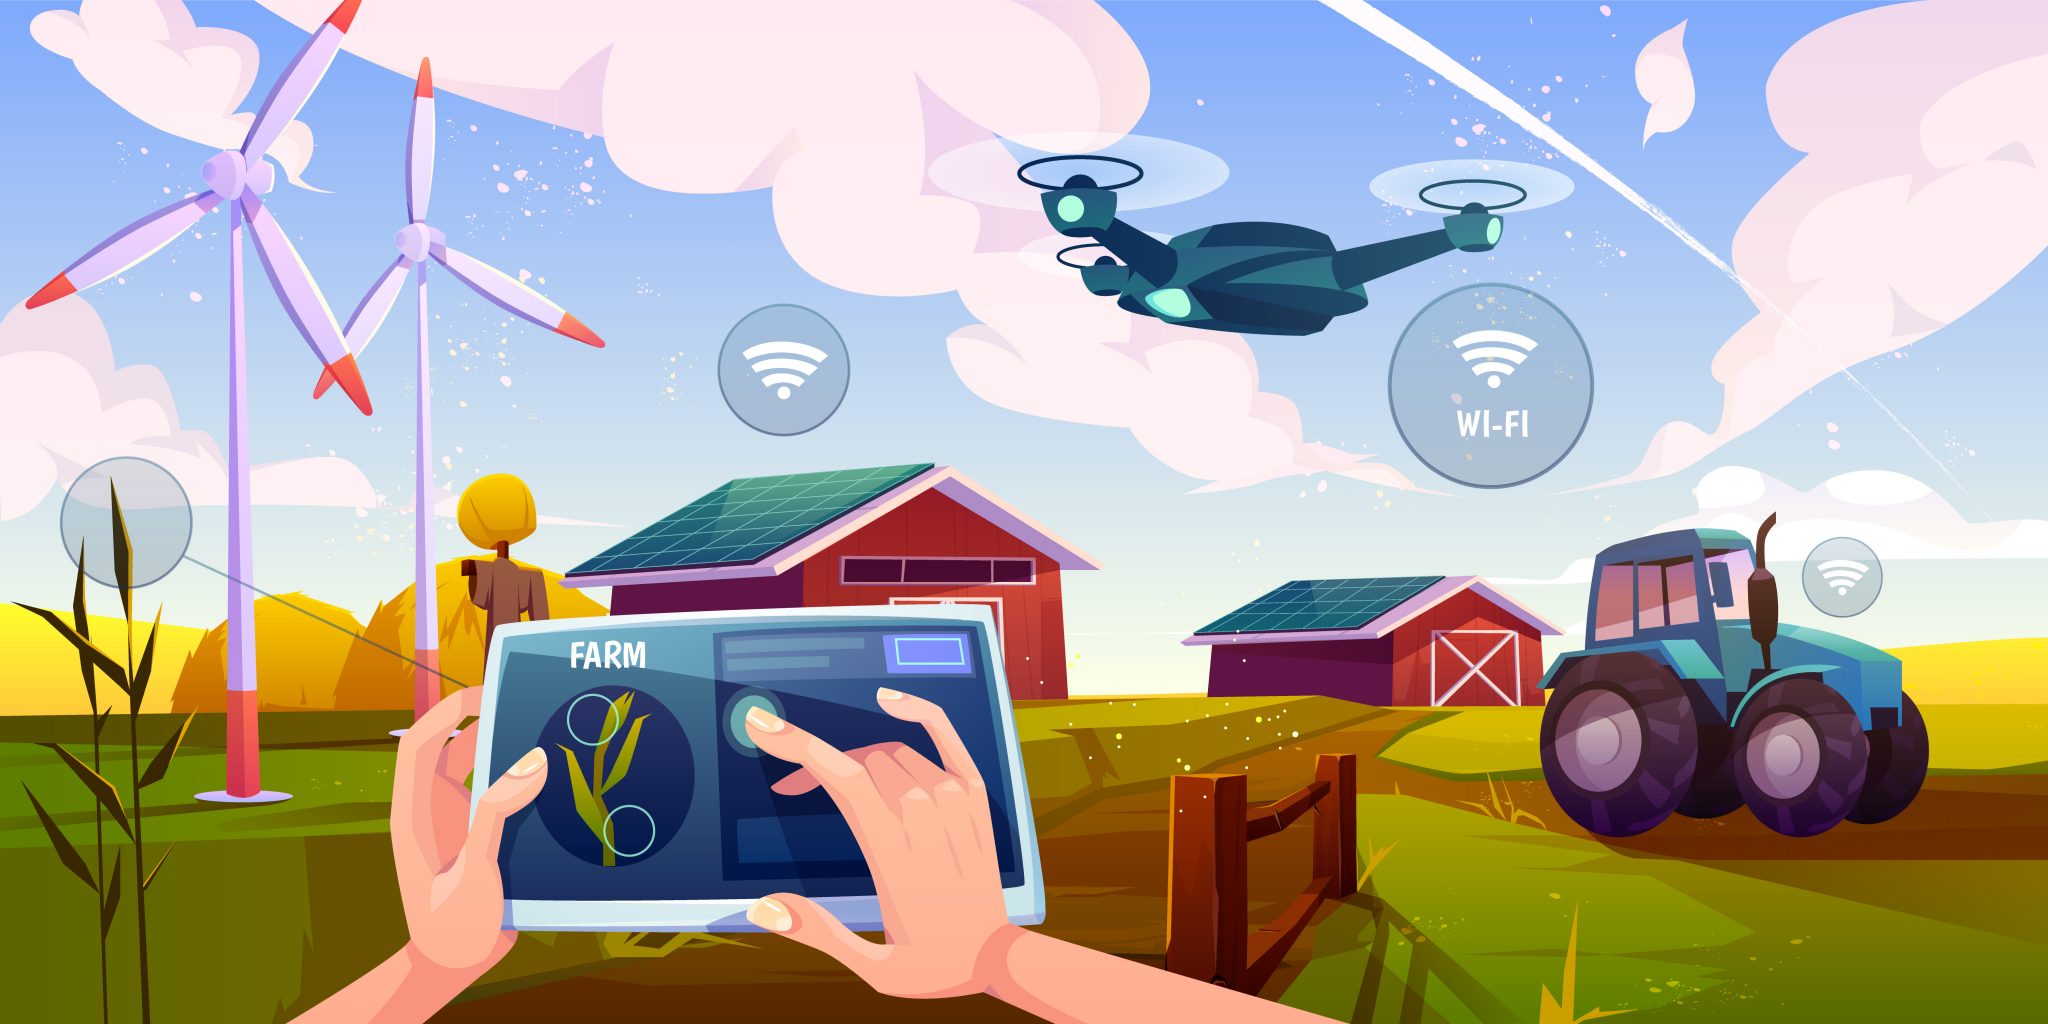 The Future Of Drones In Agriculture Unlimited Only By Your